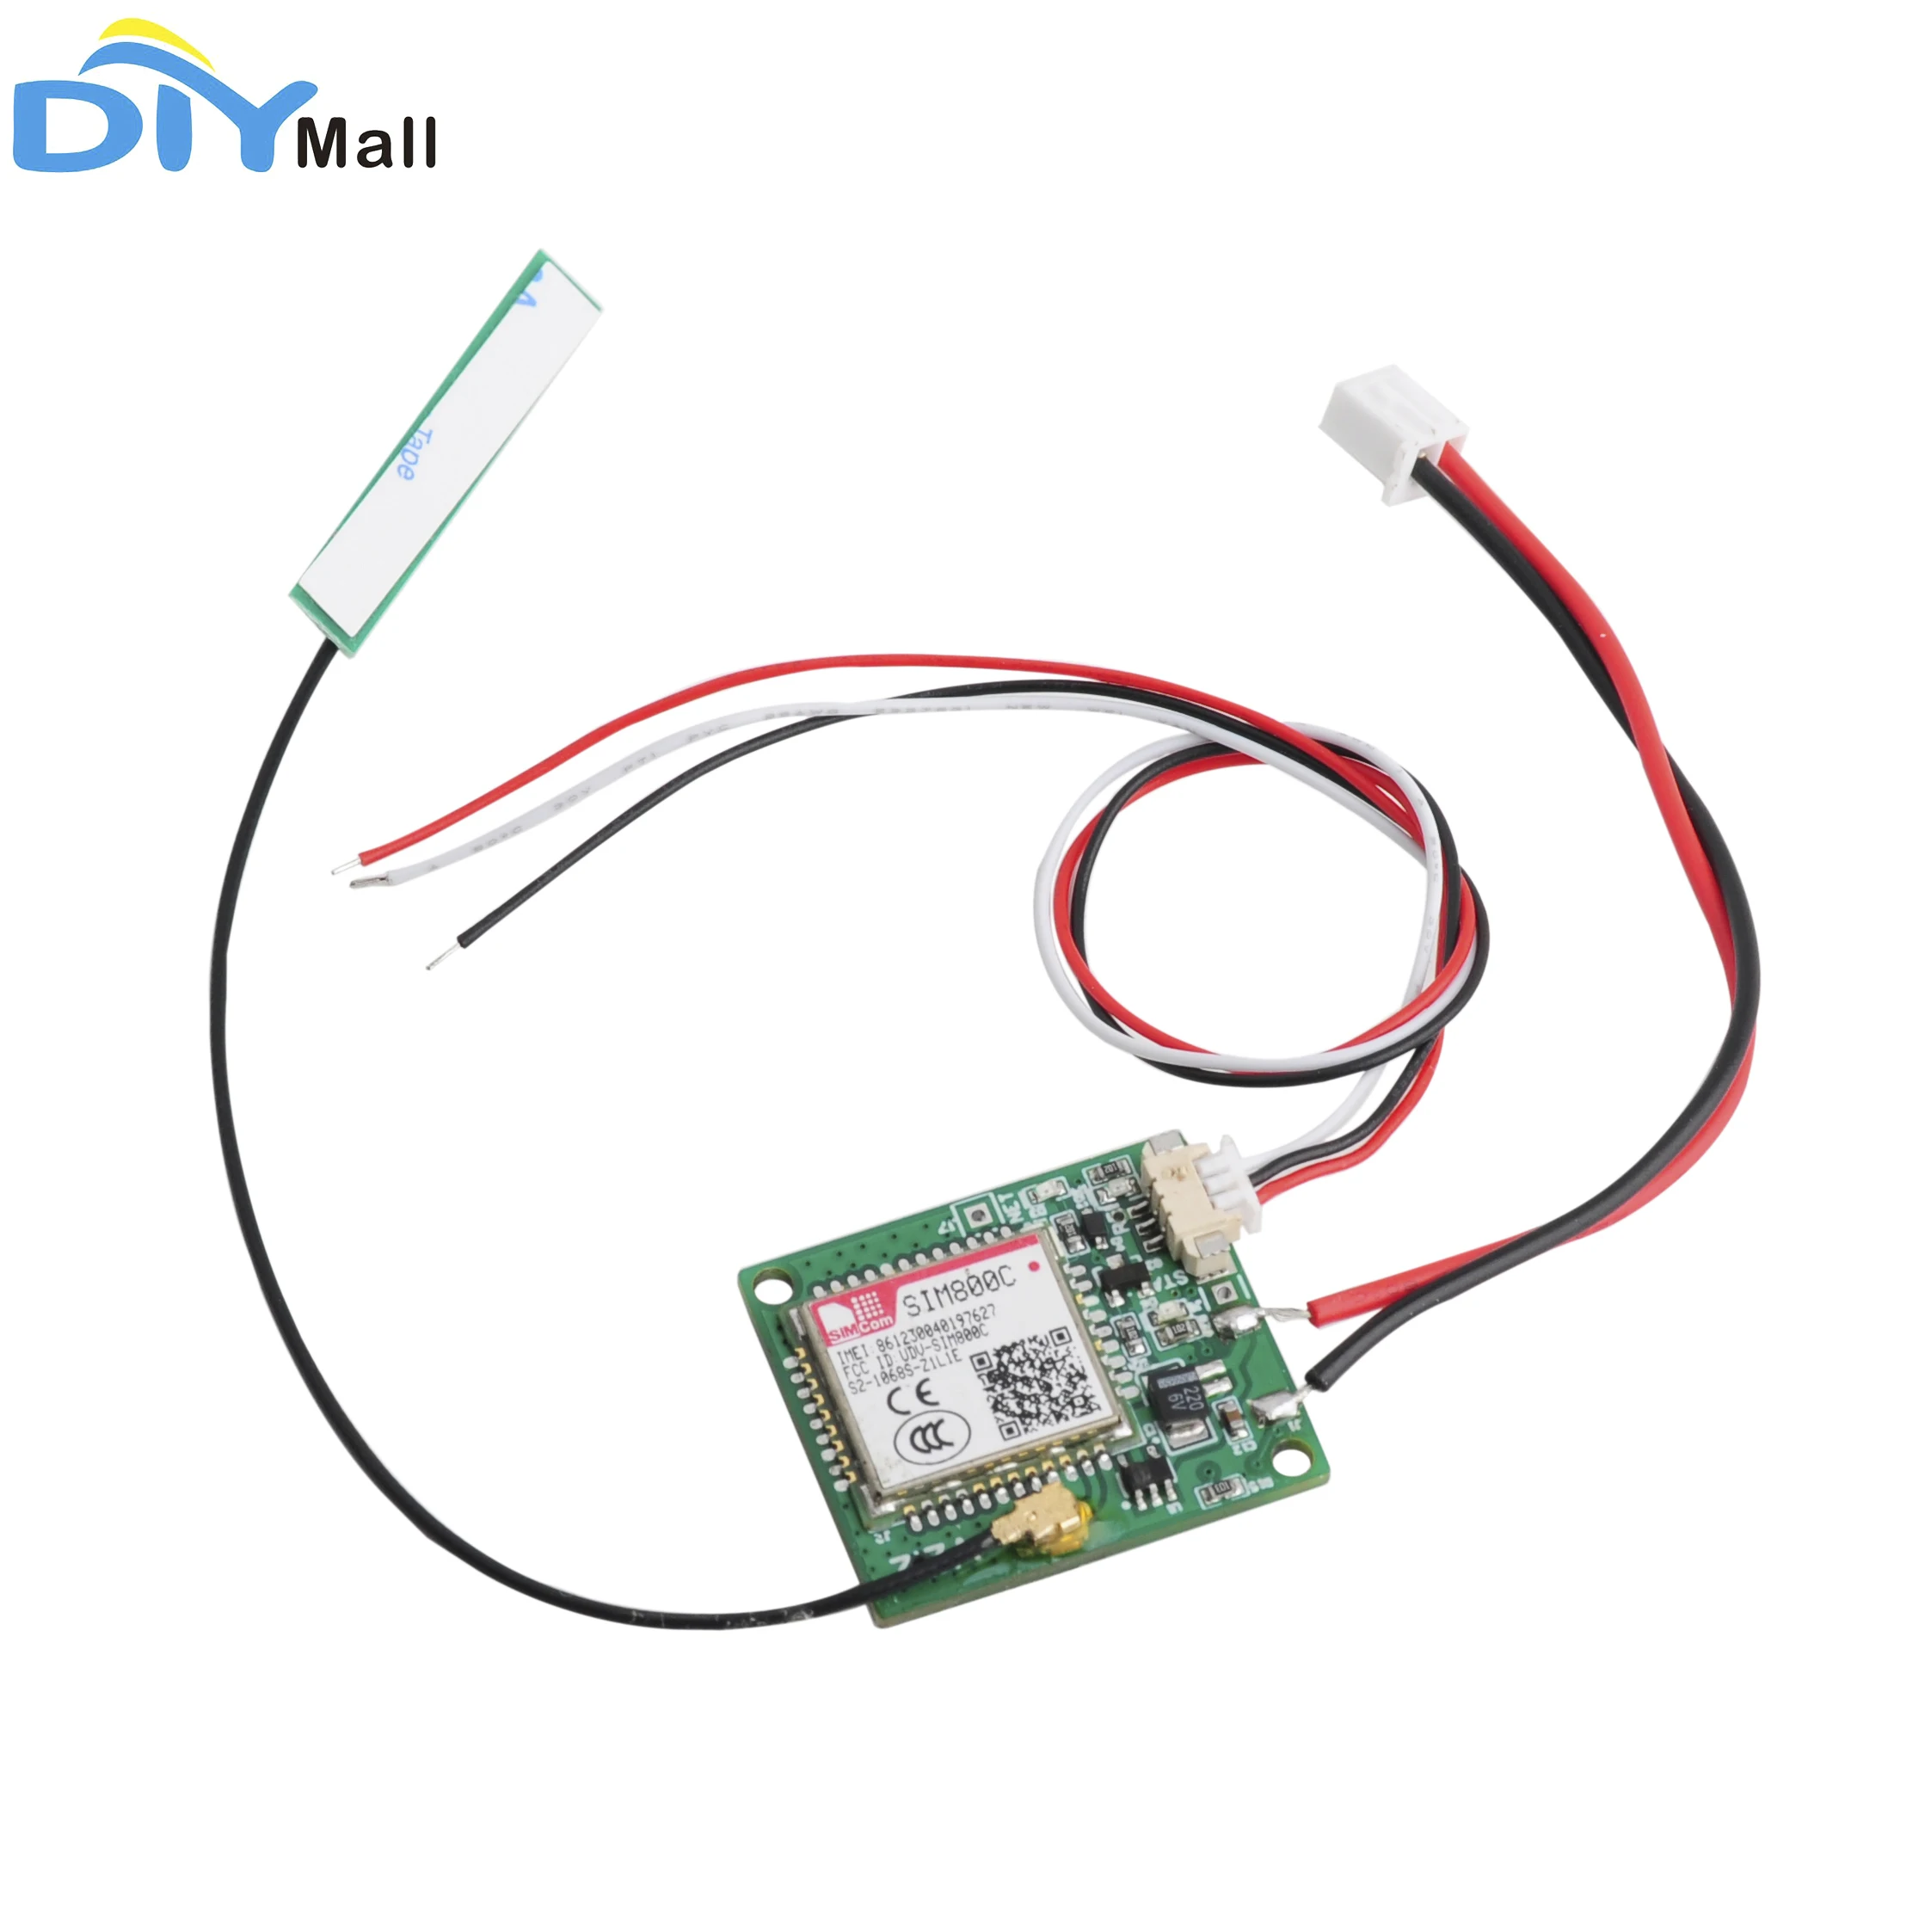 

DIYmall 1 Channel Relay Module SMS GSM Remote Control Switch SIM800C STM32F103CBT6 for Greenhouse Oxygen Pump